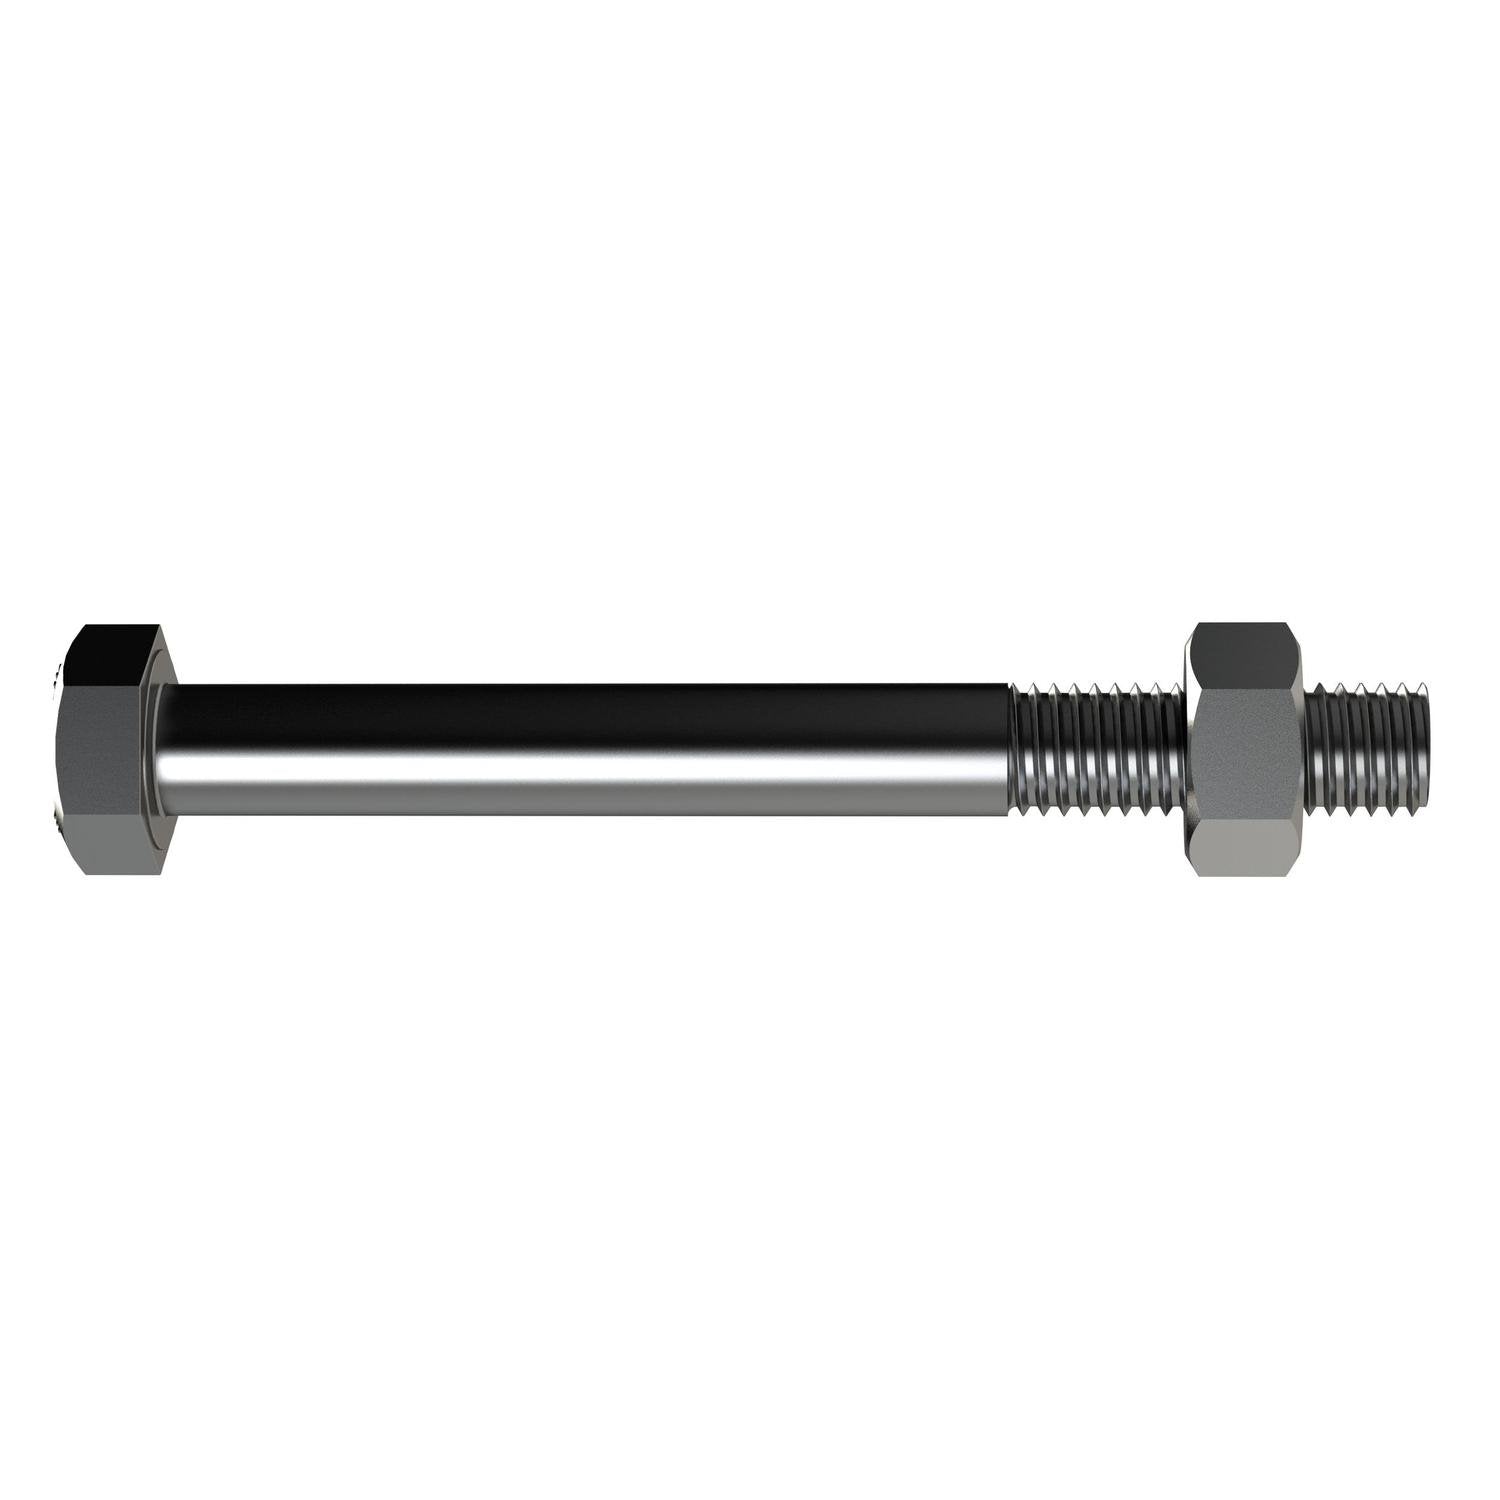 Bremick Engineer Bolt & Nut M16 X 260Mm Stainless Steel